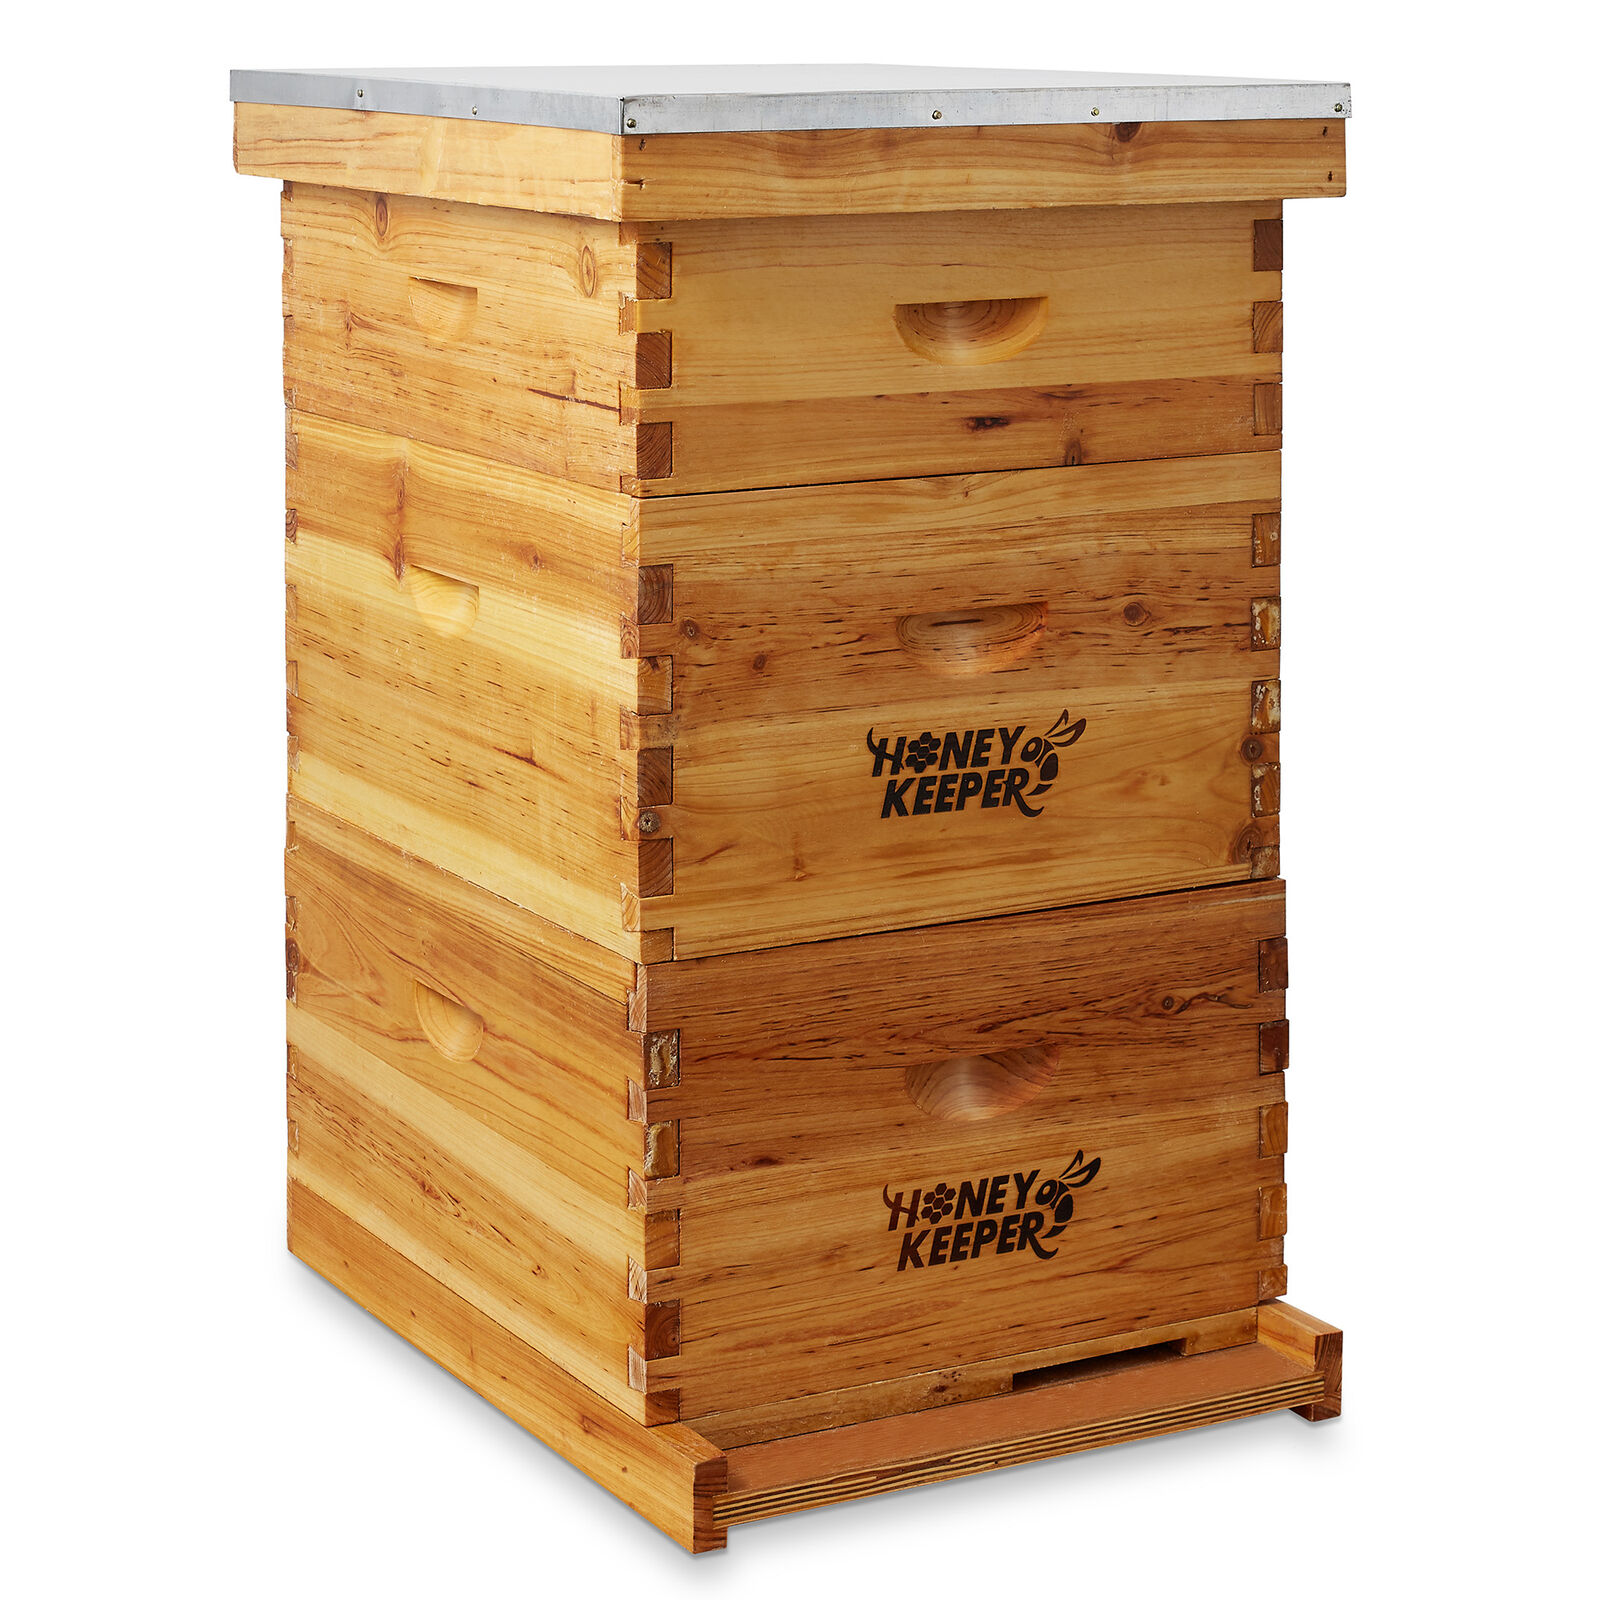 Langstroth Beehive 10 Wooden Frame Box Kit with Waxed Boxes, 2 Deep and 1 Medium